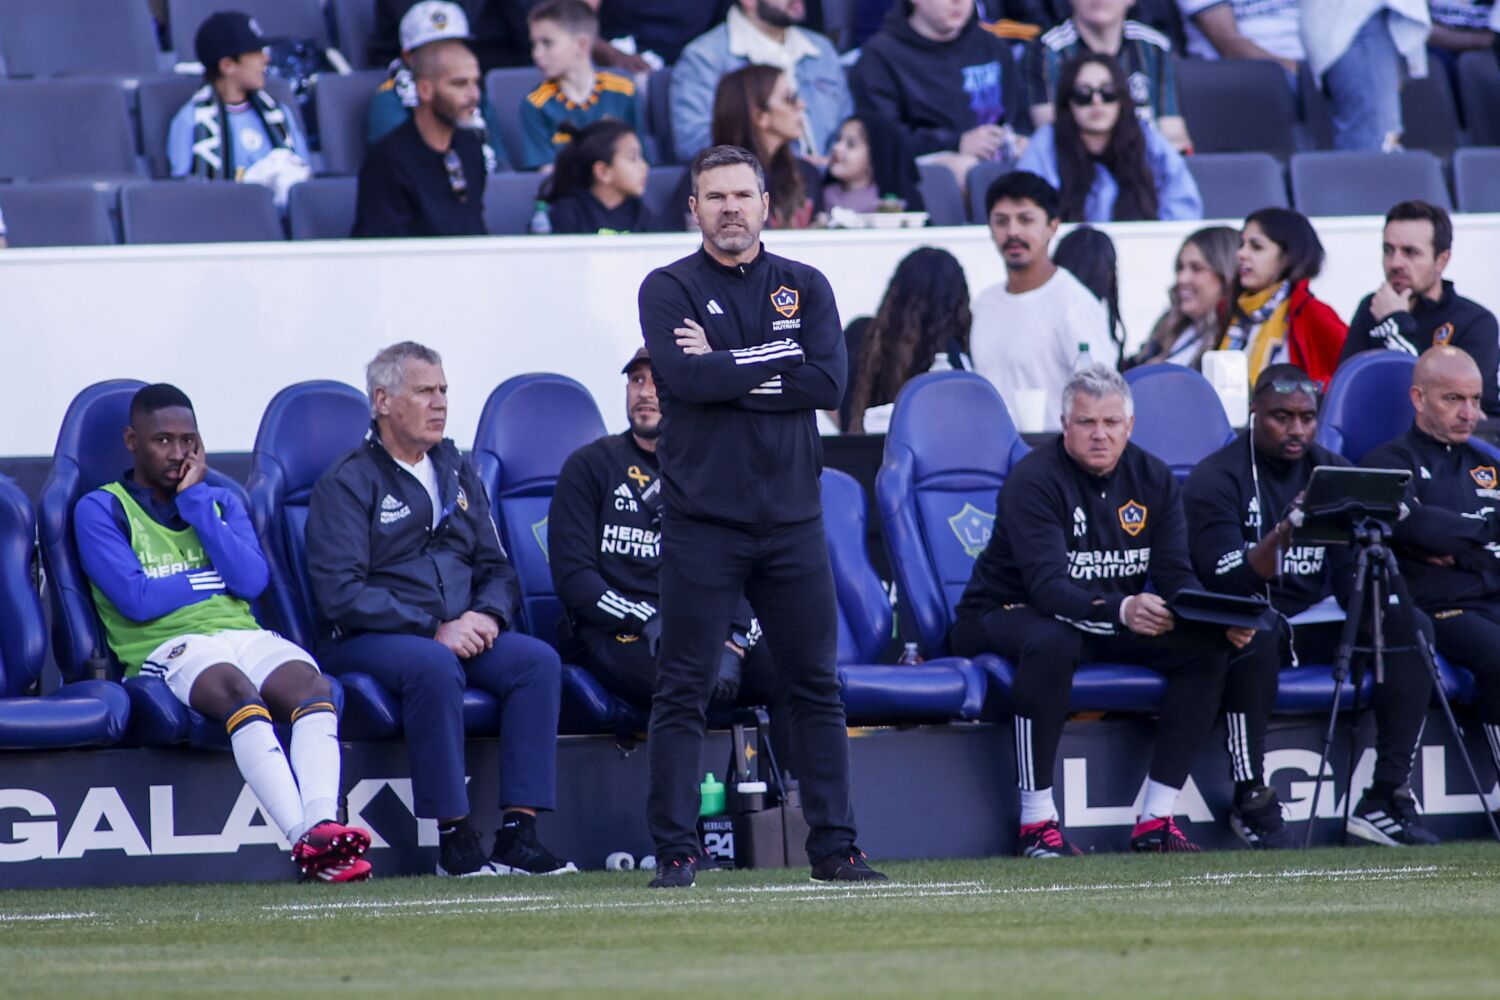 Commentary: The Galaxy are broken. It's time to clean house and start all over again